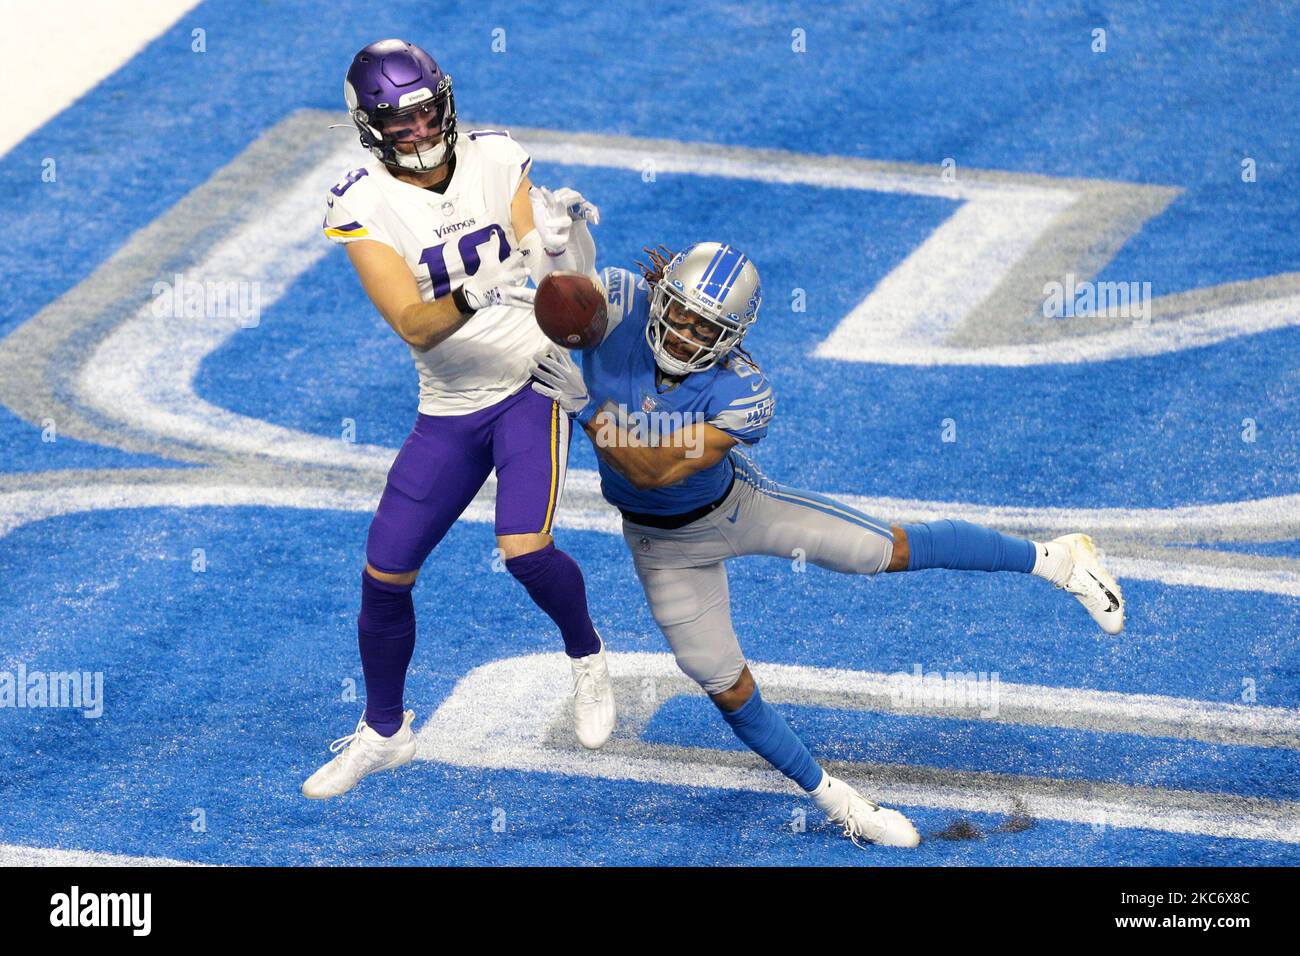 Detroit Lions cornerback Darryl Roberts (29) breaks a pass intended to Minnesota Vikings wide receiver Adam Thielen (19) in the endzone during the first half of an NFL football game in Detroit, Michigan USA, on Sunday, January 3, 2021. (Photo by Jorge Lemus/NurPhoto) Stock Photo